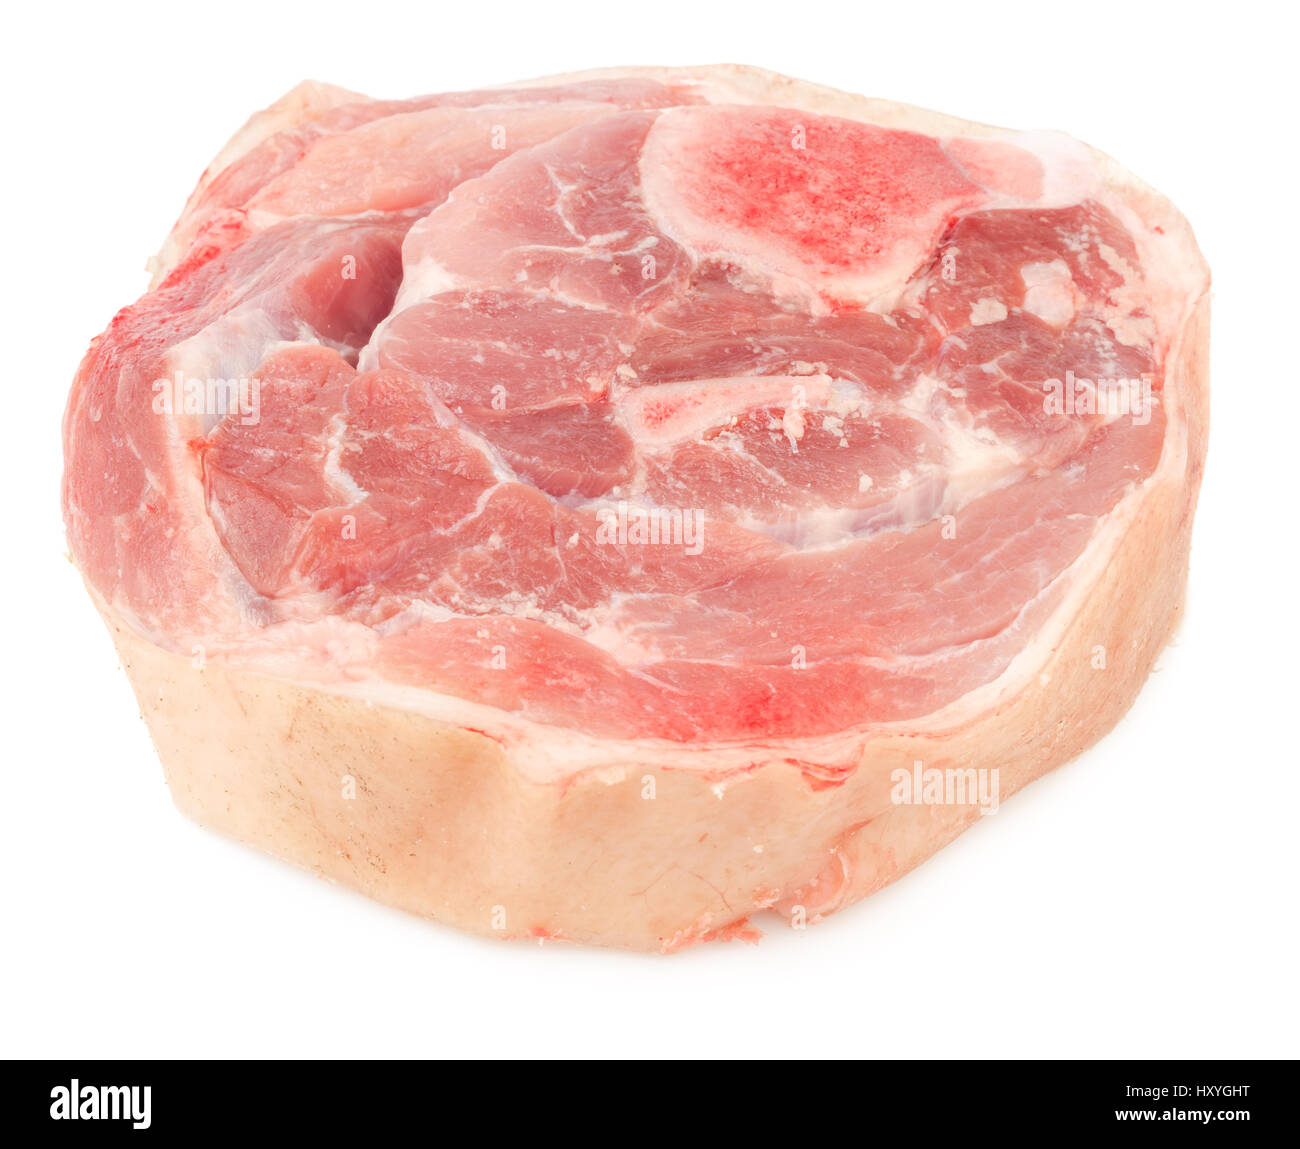 Natural dog food. Slice of raw pork meat with bone and skin isolated on white background. Stock Photo